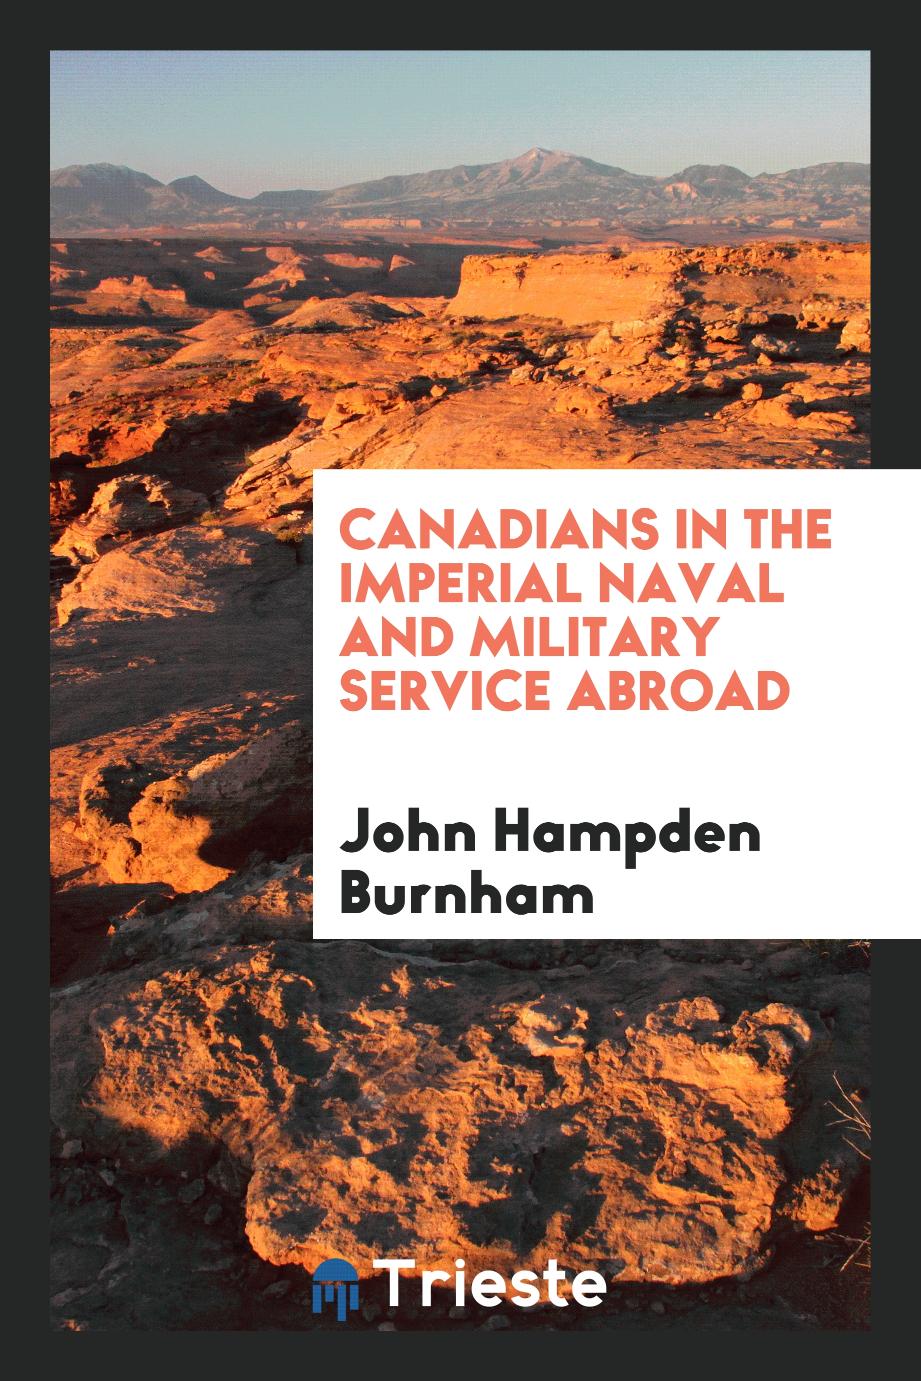 Canadians in the imperial naval and military service abroad